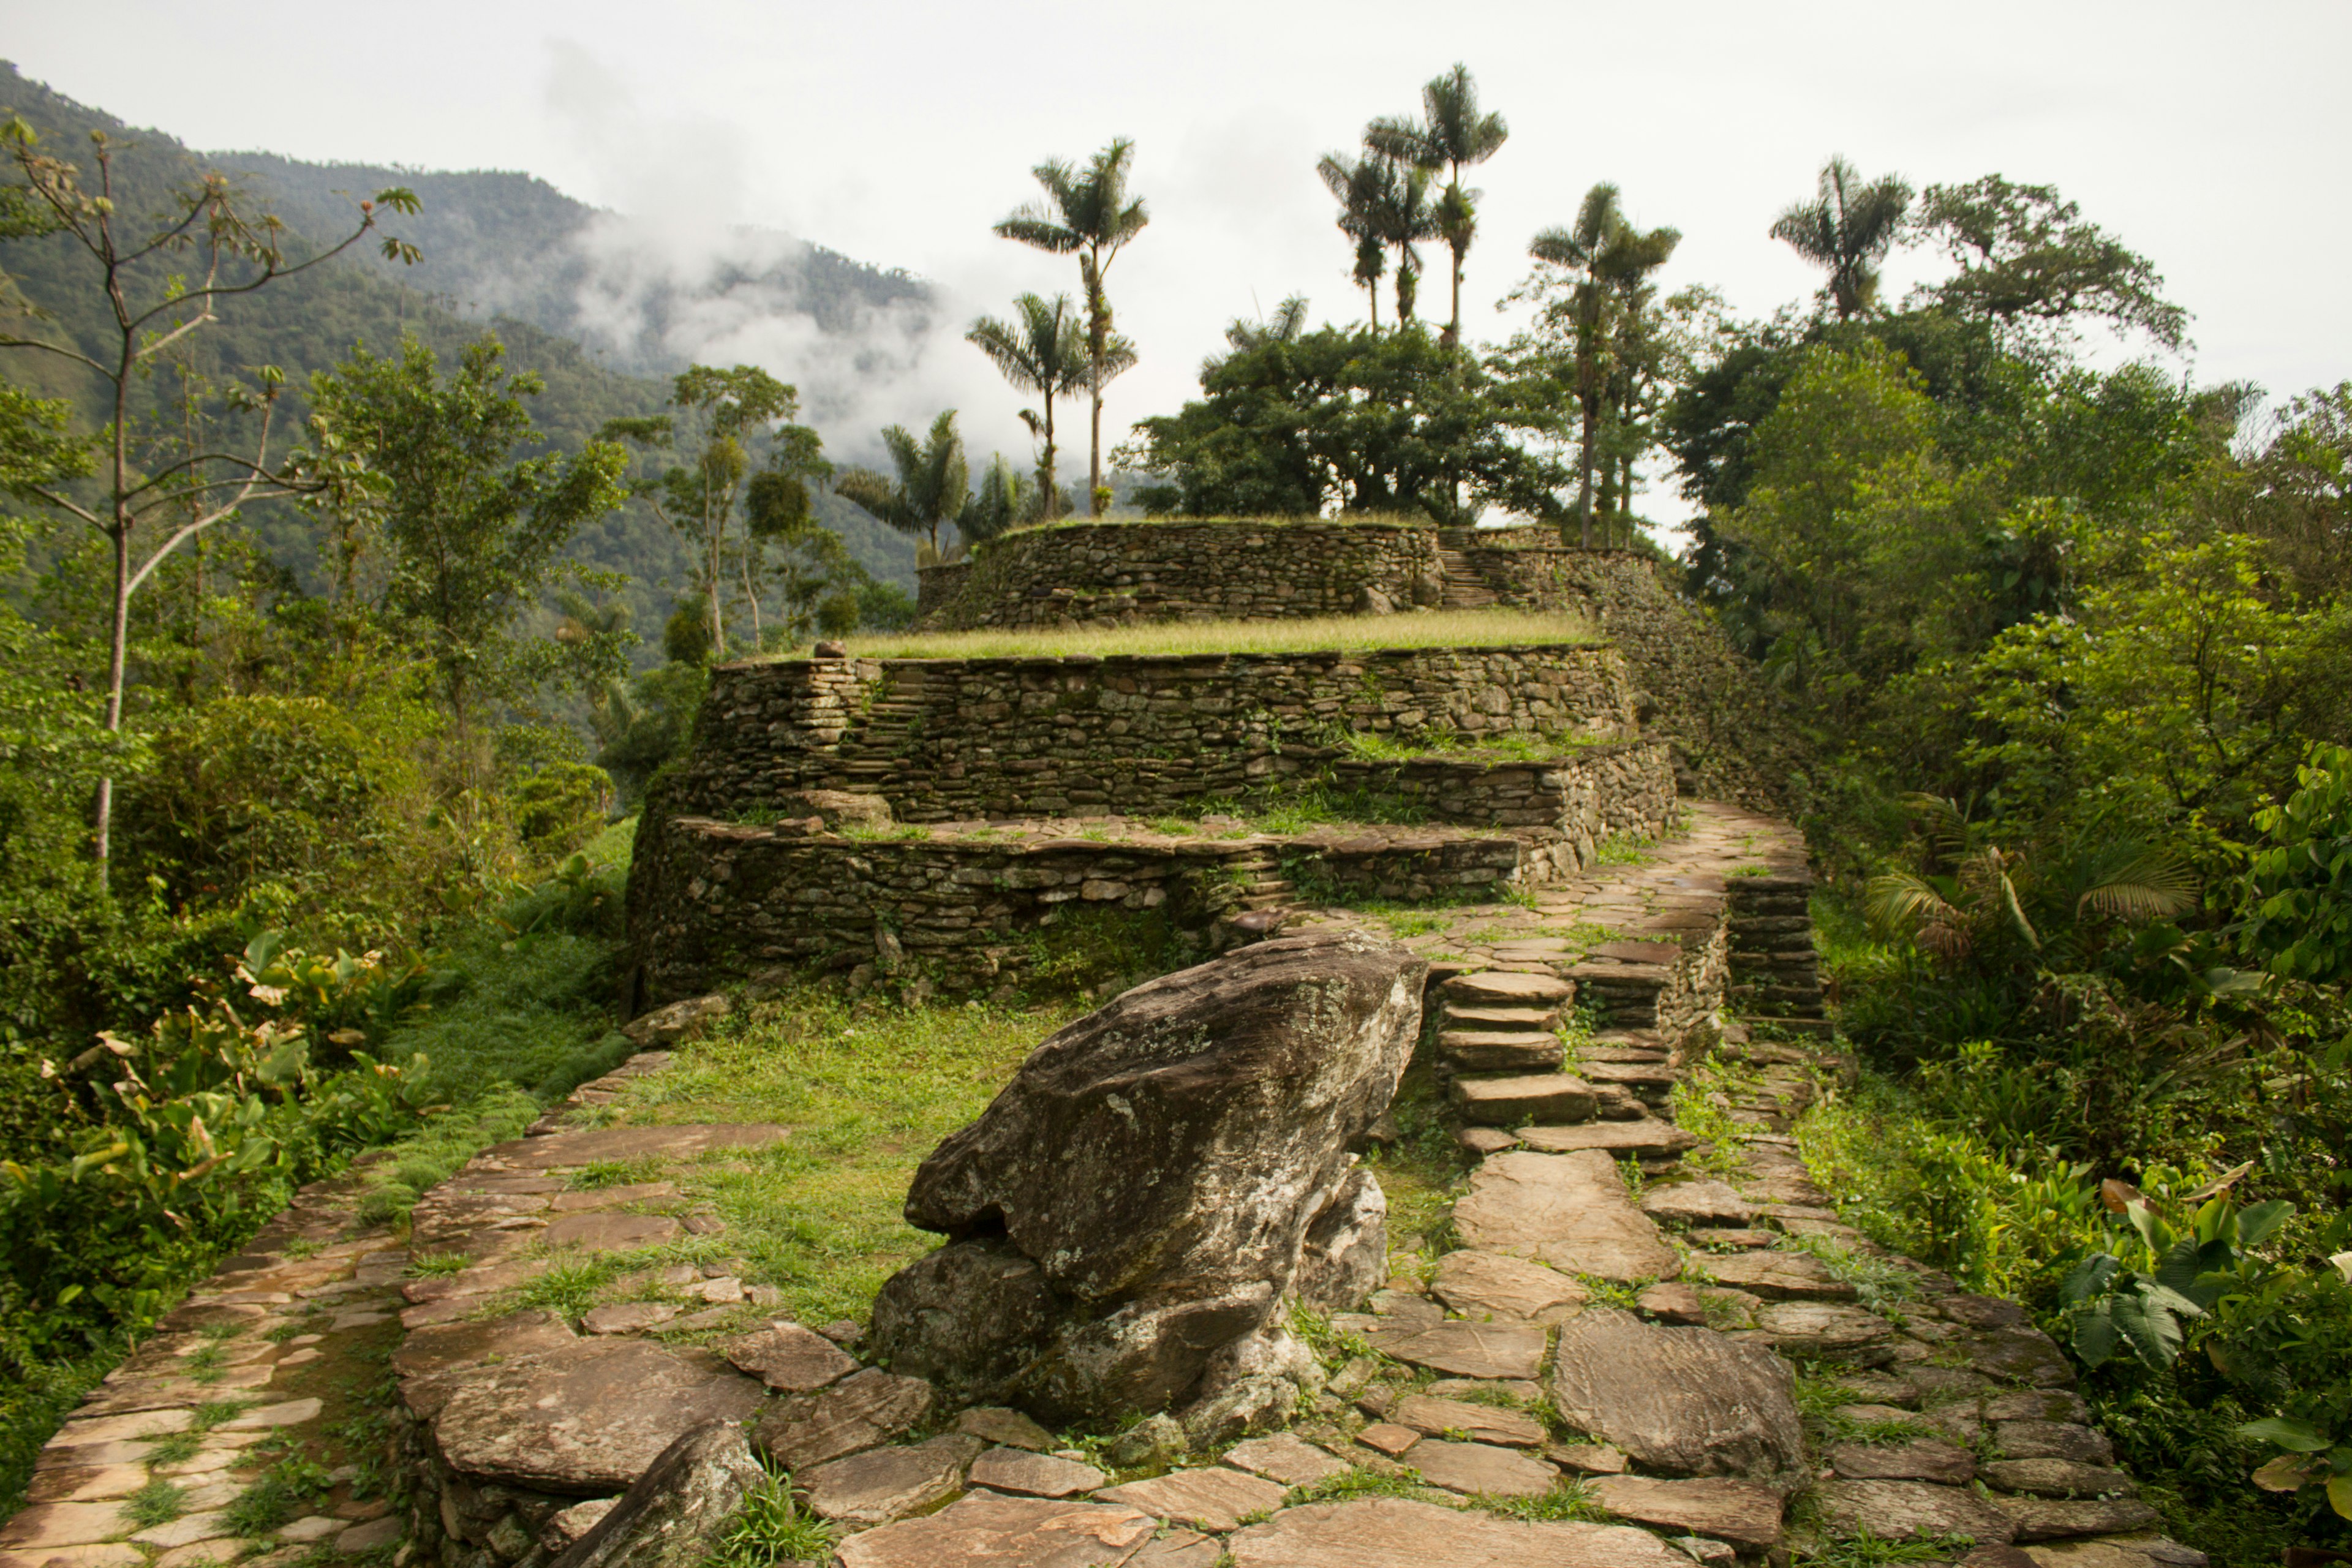 Lost City, Colombia